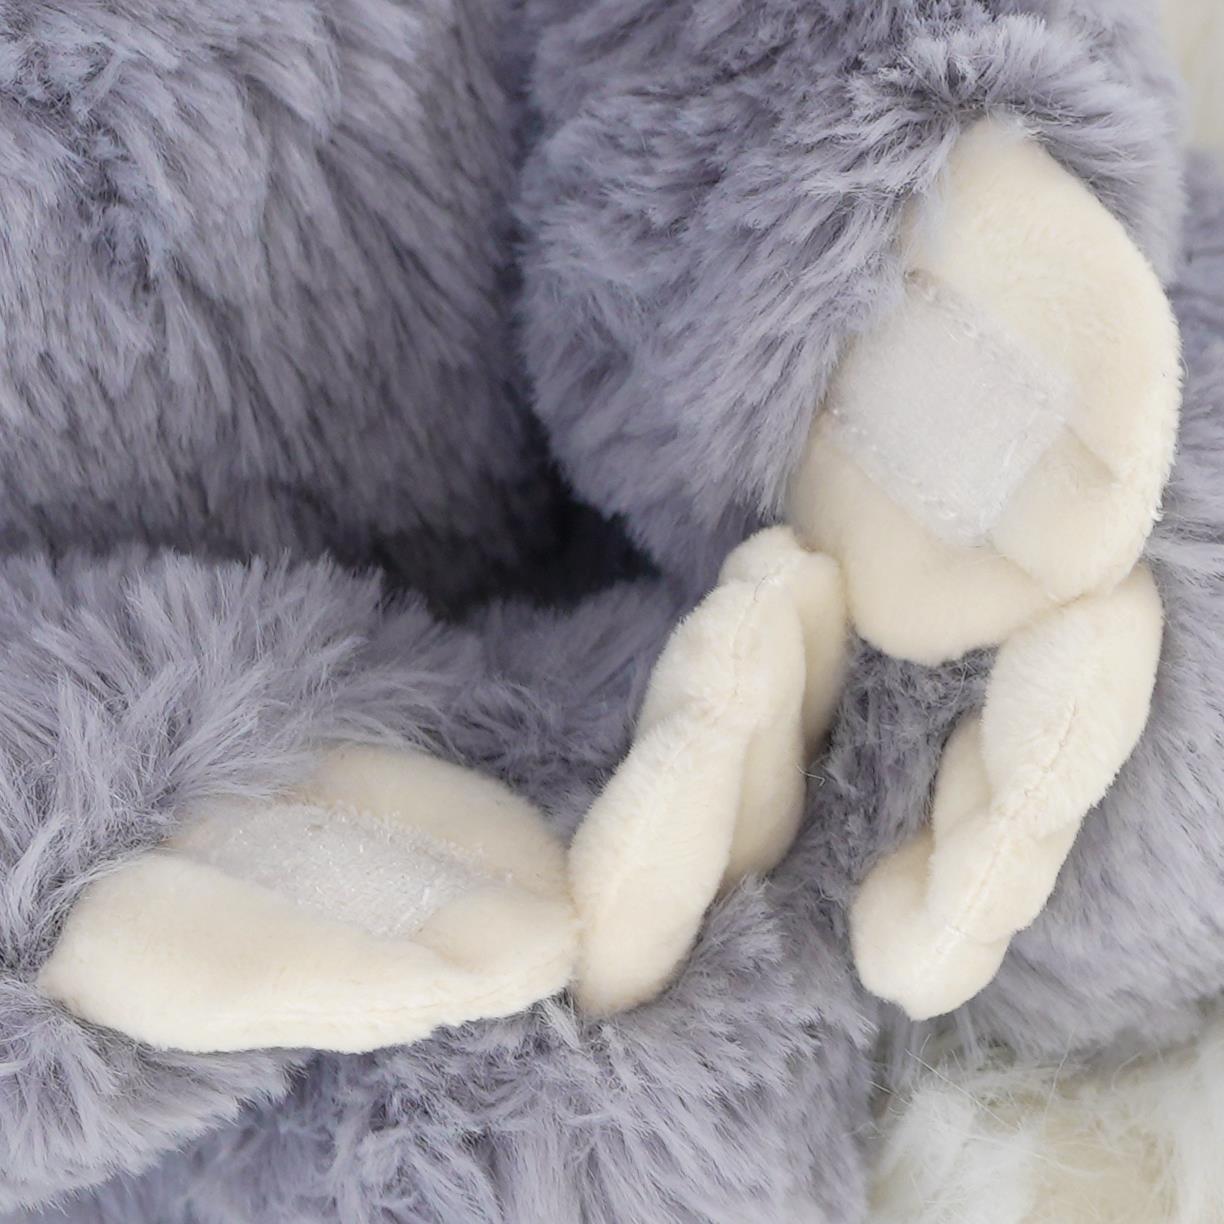 Plush Super Soft Hanging Sloth Cuddly Toy by The Magic Toy Shop - The Magic Toy Shop